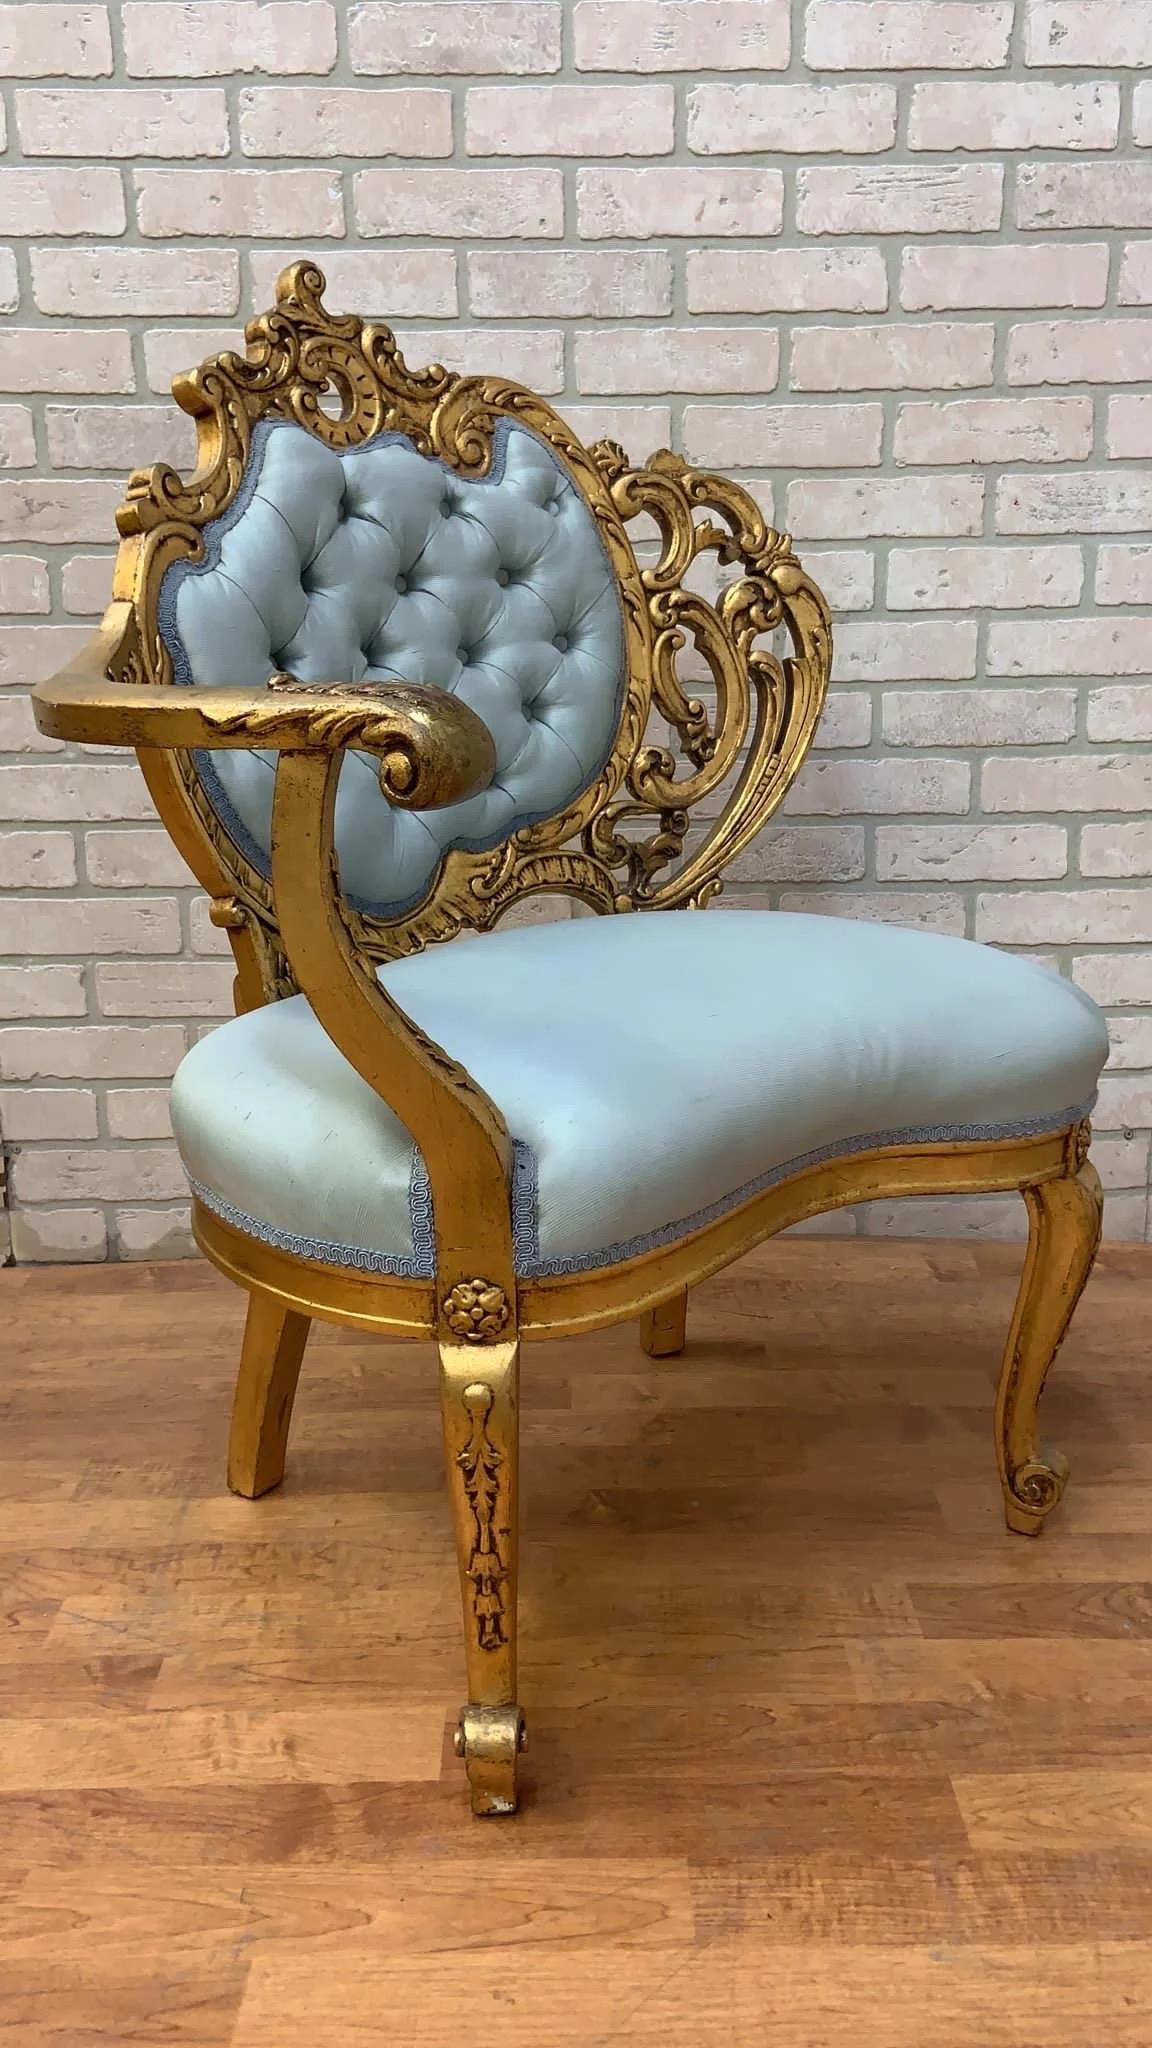 Upholstery Vintage French Louis Style Carved Asymmetrical Baroque Revival Armchair